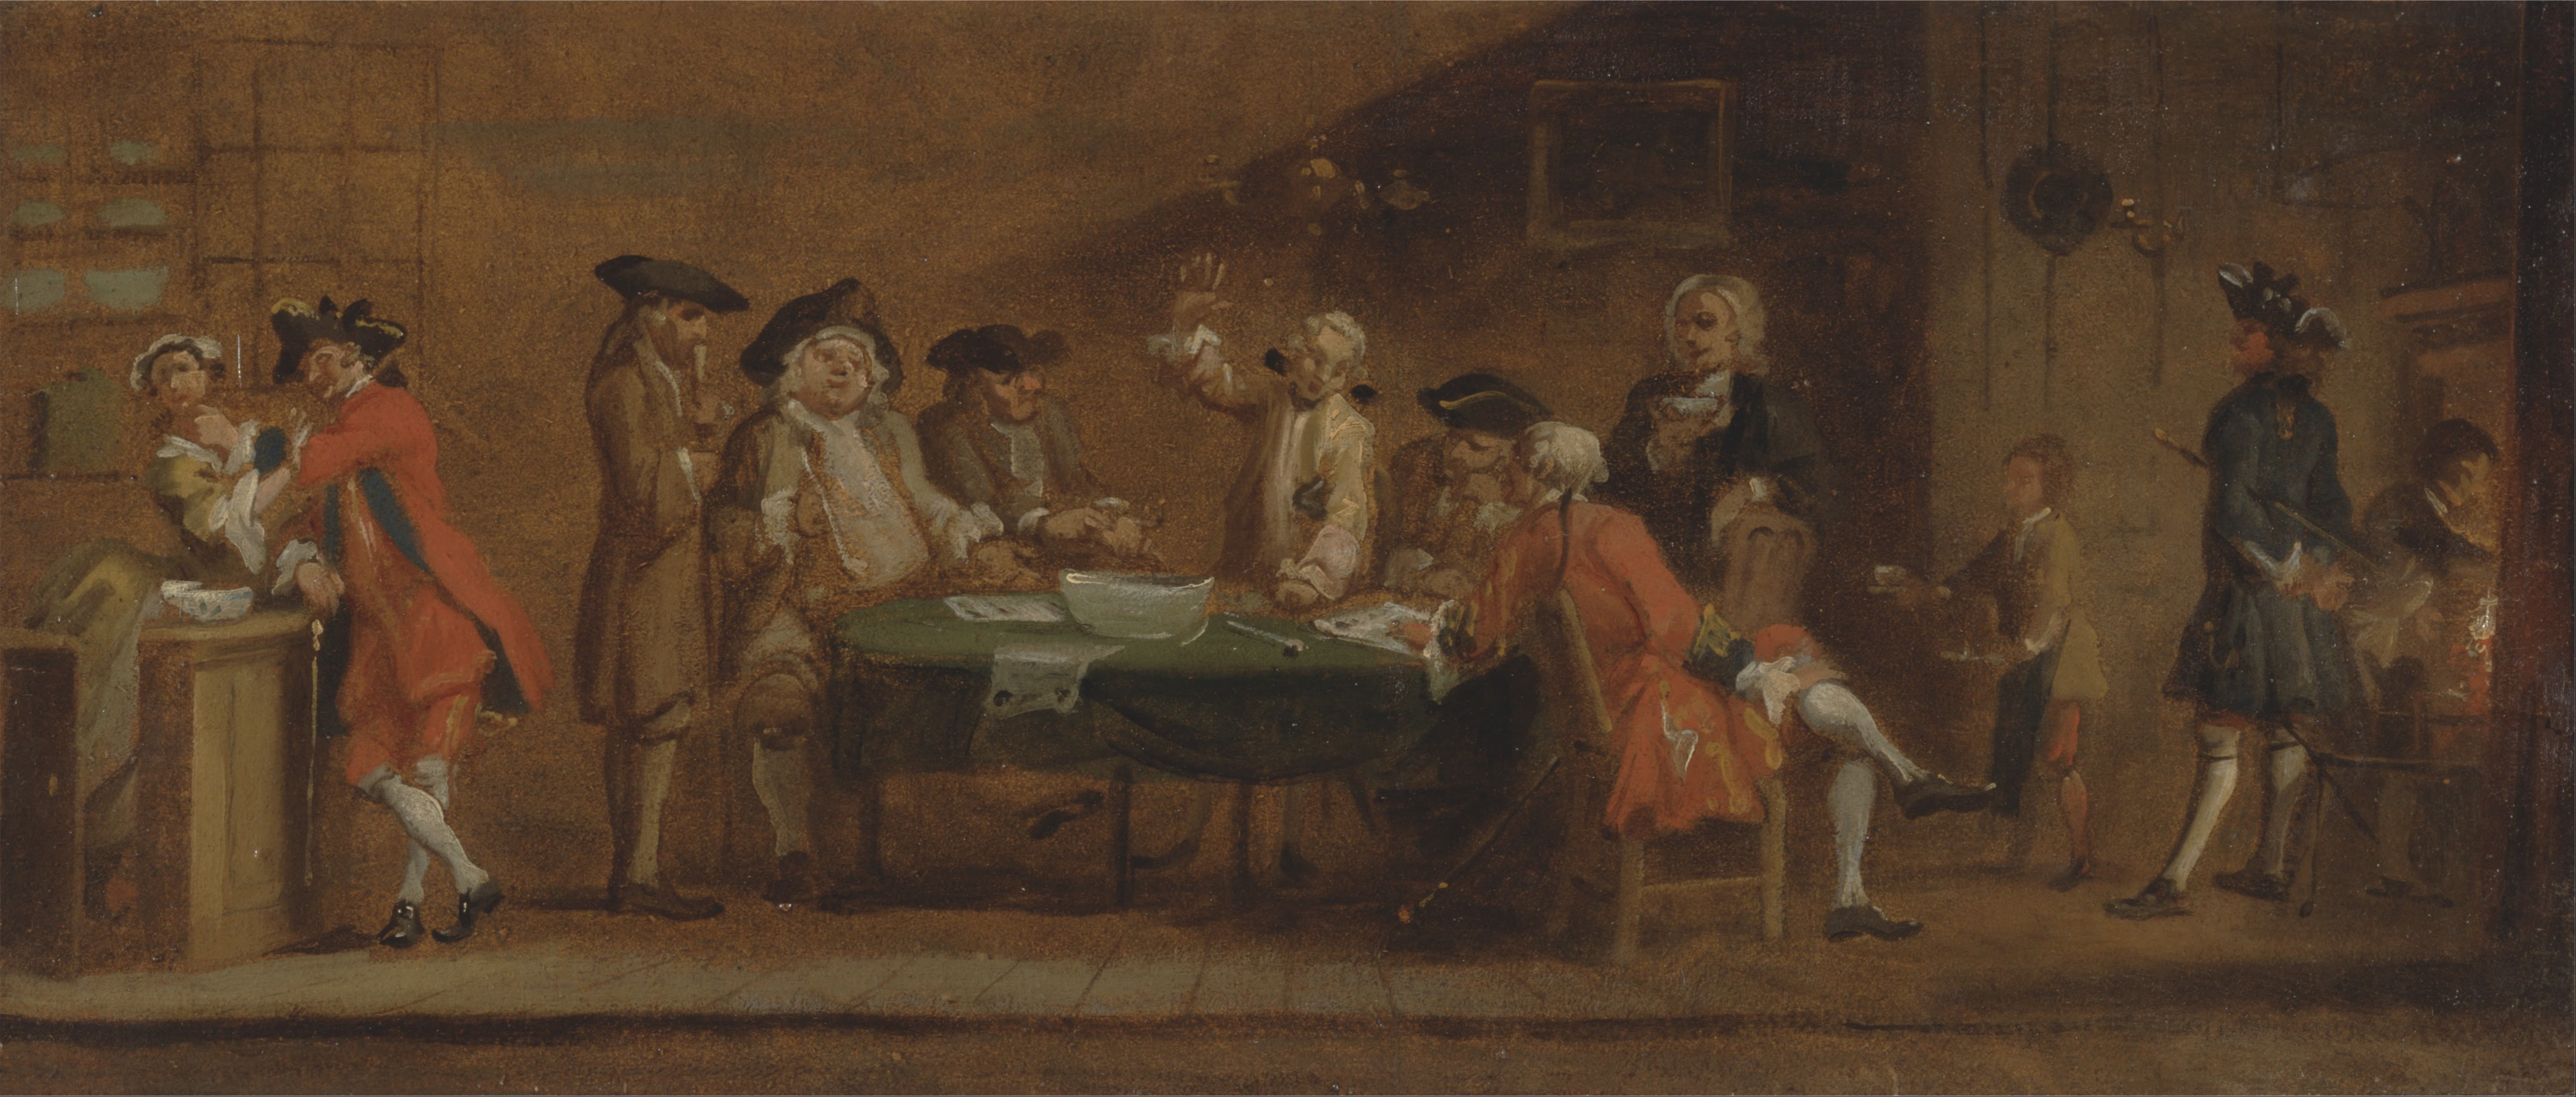 Joseph_Highmore_-_Figures_in_a_Tavern_or_Coffee_House_-_Google_Art_Project